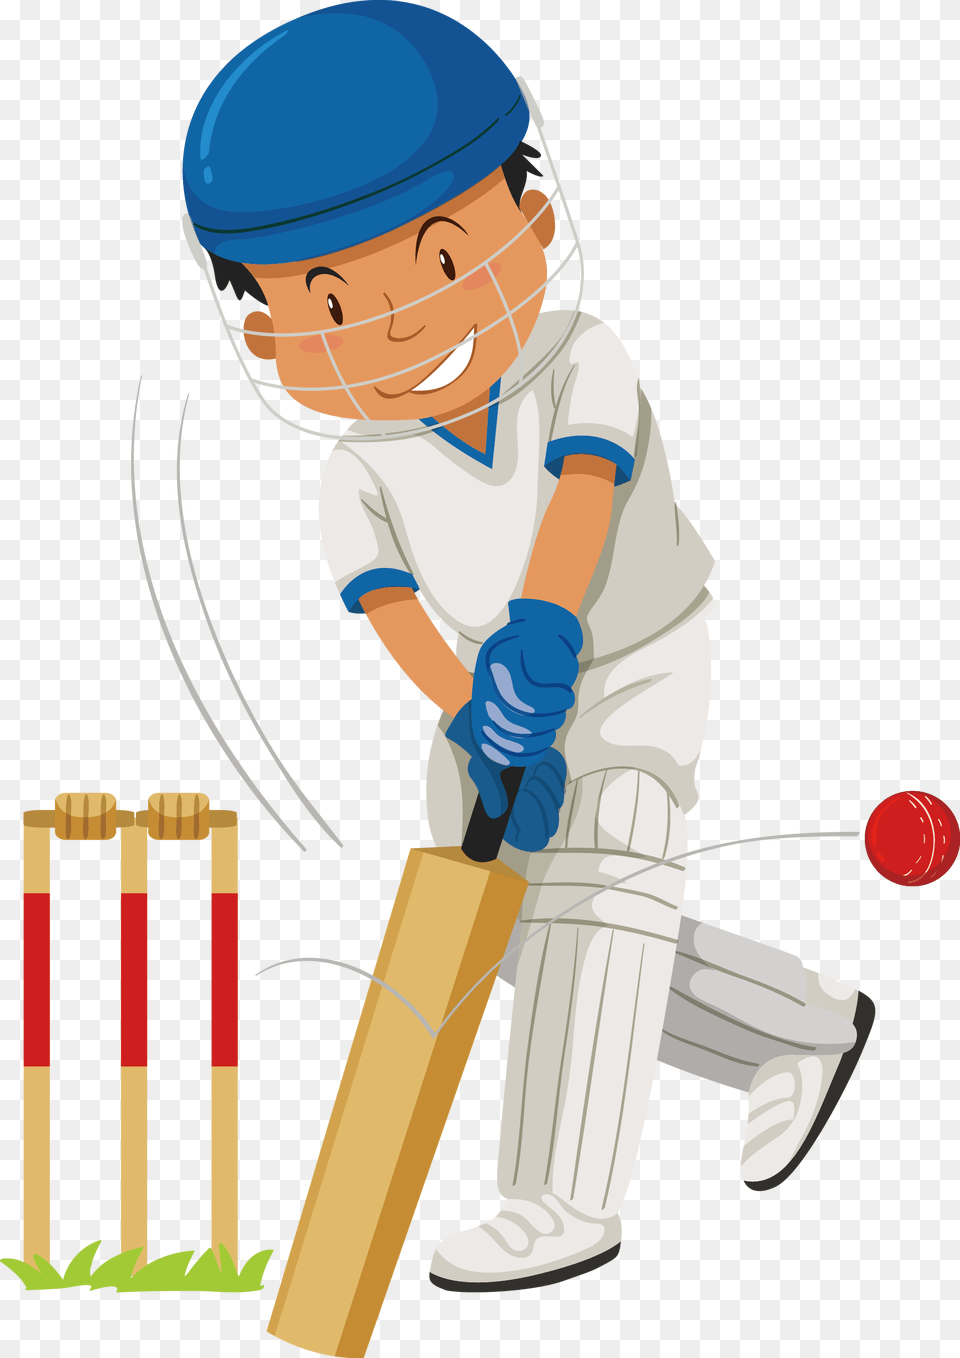 Cricket Bat Ball Cricket Bat With Ball, Person, People, Boy, Child Png Image